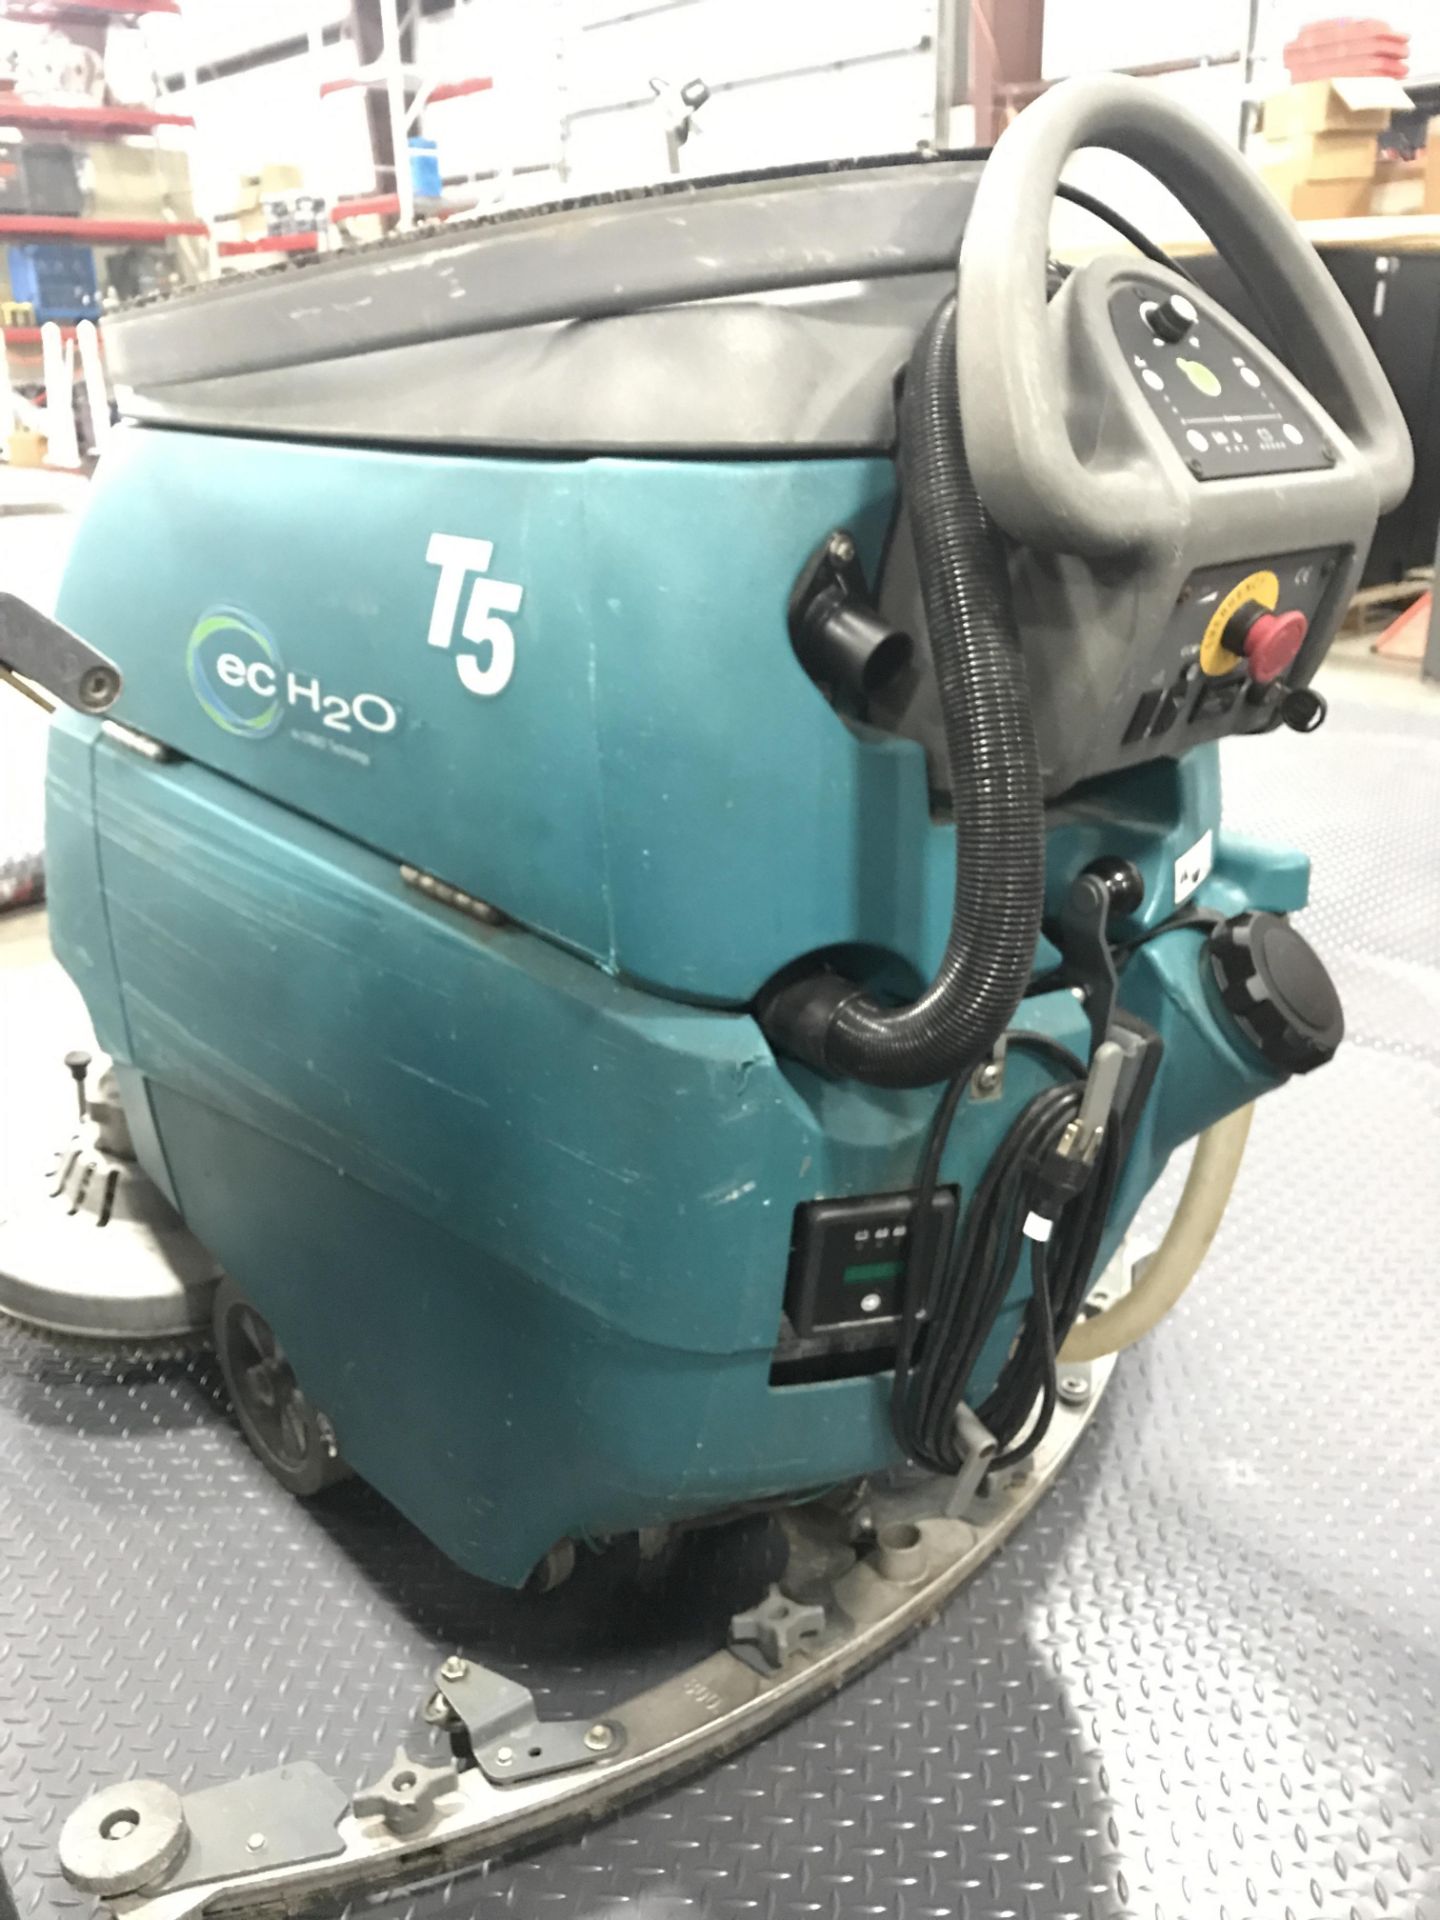 TENNANT T5 FLOOR SWEEPER/SCRUBBER, ECO H20, 780 HOURS SHOWING. - Image 4 of 8